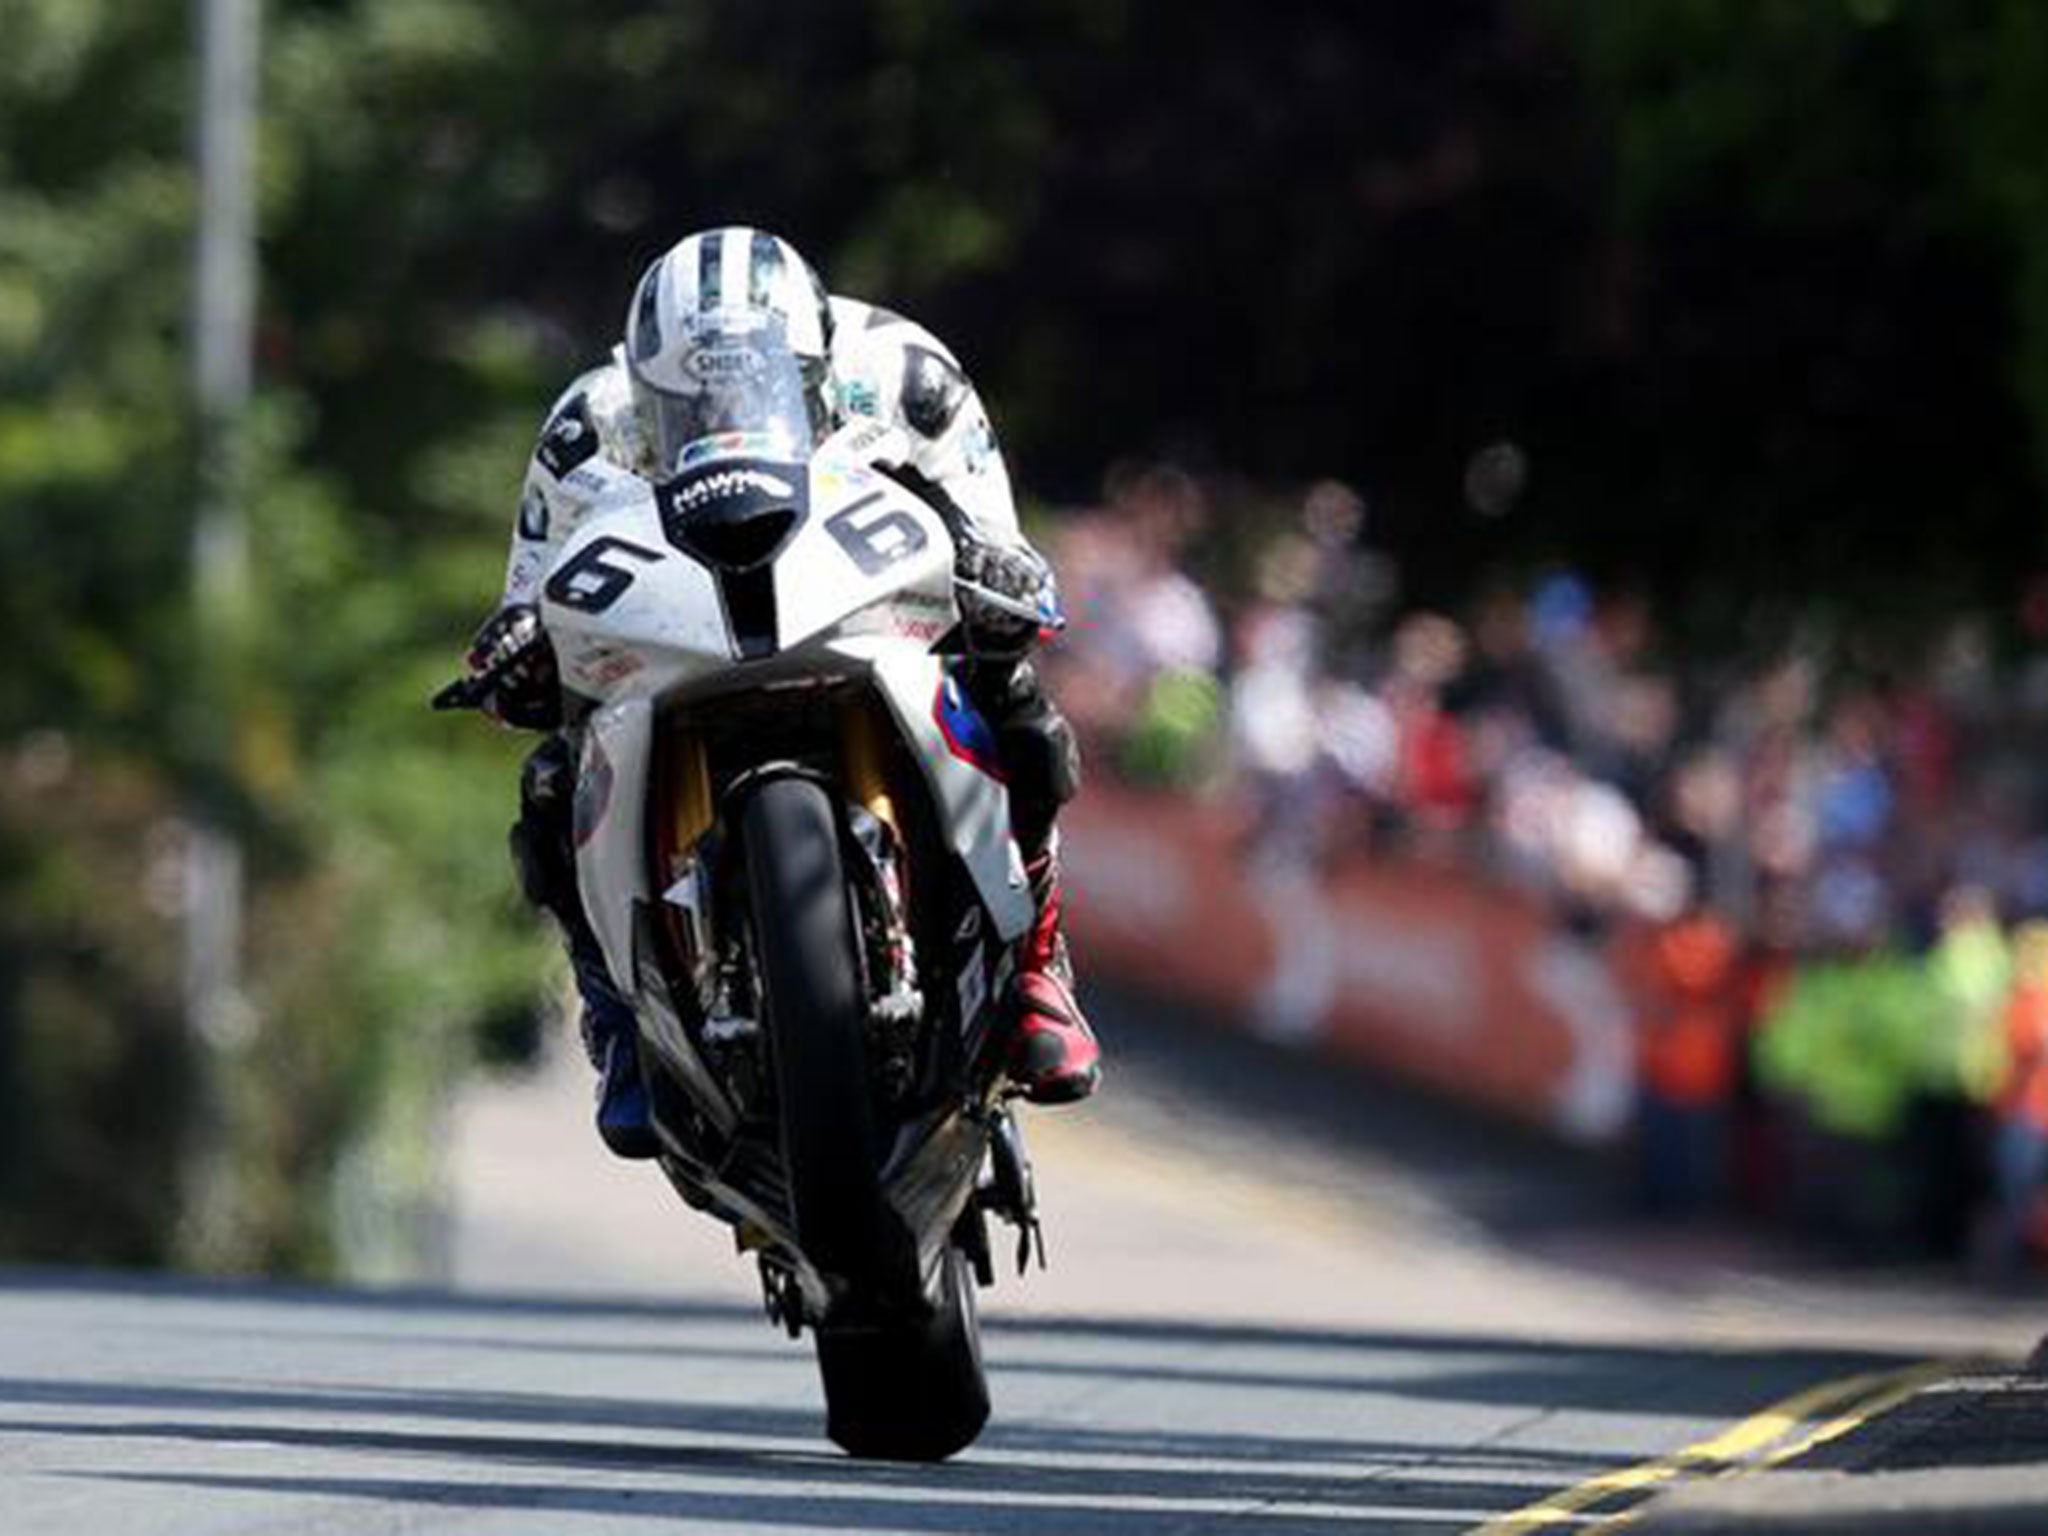 Michael Dunlop on his way to victory in the Isle of Man TT Senior race